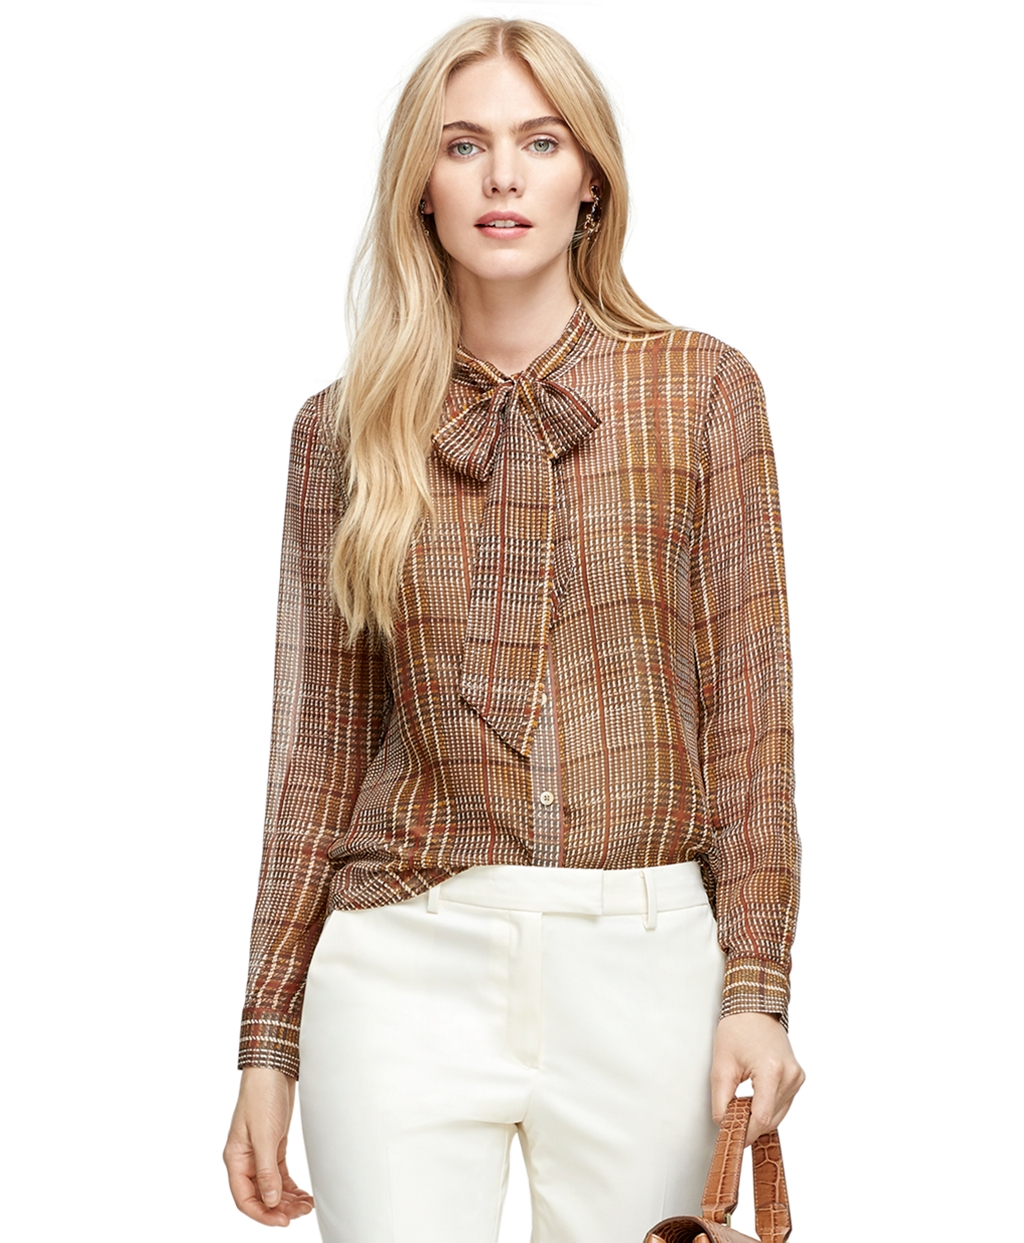 Lyst - Brooks Brothers Bow-front Silk Plaid Blouse in Brown